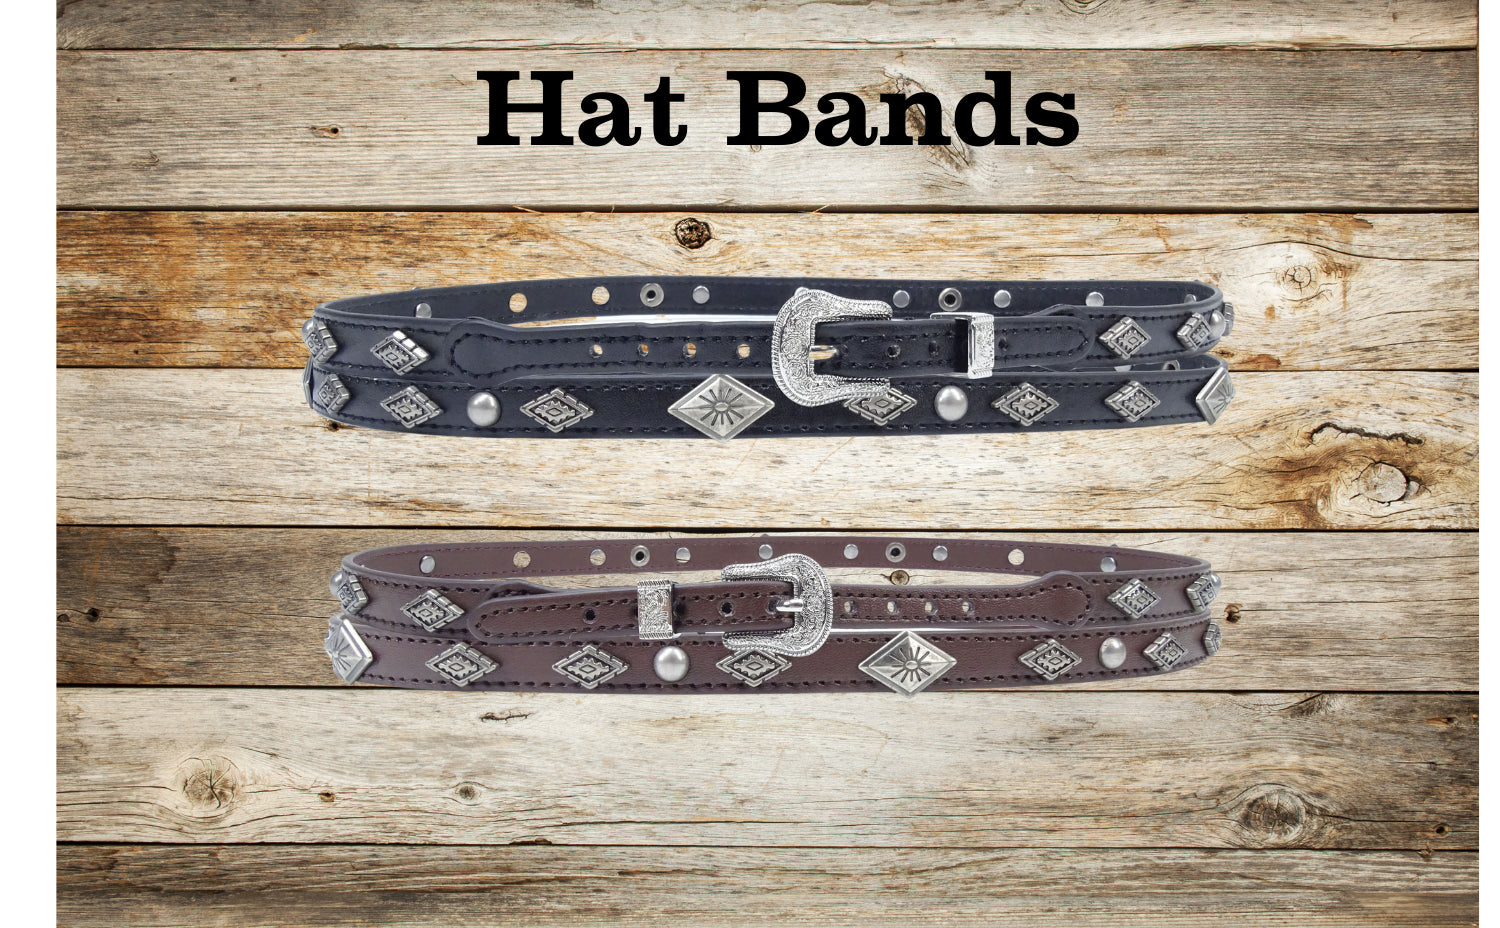 Beaded Vegan Leather Hat Bands for Cowboy Hats - Stylish Hat Accessories  for Men or Women - Three Strand Light Brown Wood Beads and Silver